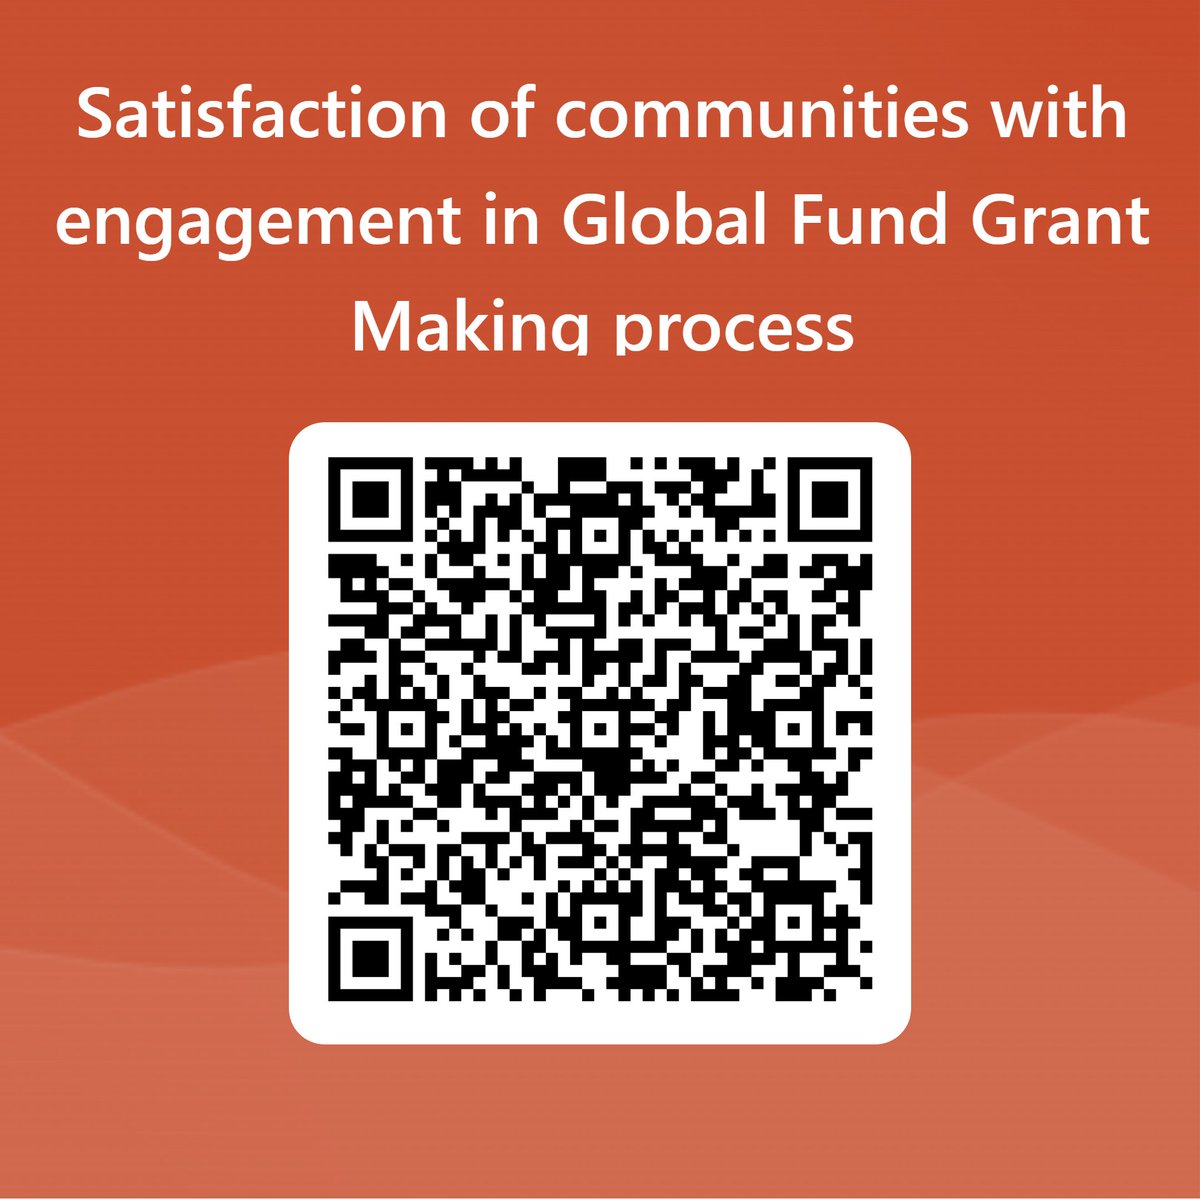 Your insights shape our global commitment to community leadership & engagement. Participate in the @GlobalFund survey on Grant Making process (Windows 1 -3). Responses are confidential, contributing to our collective progress. Scan QR code or visit: forms.office.com/r/aMKNMLd7f8